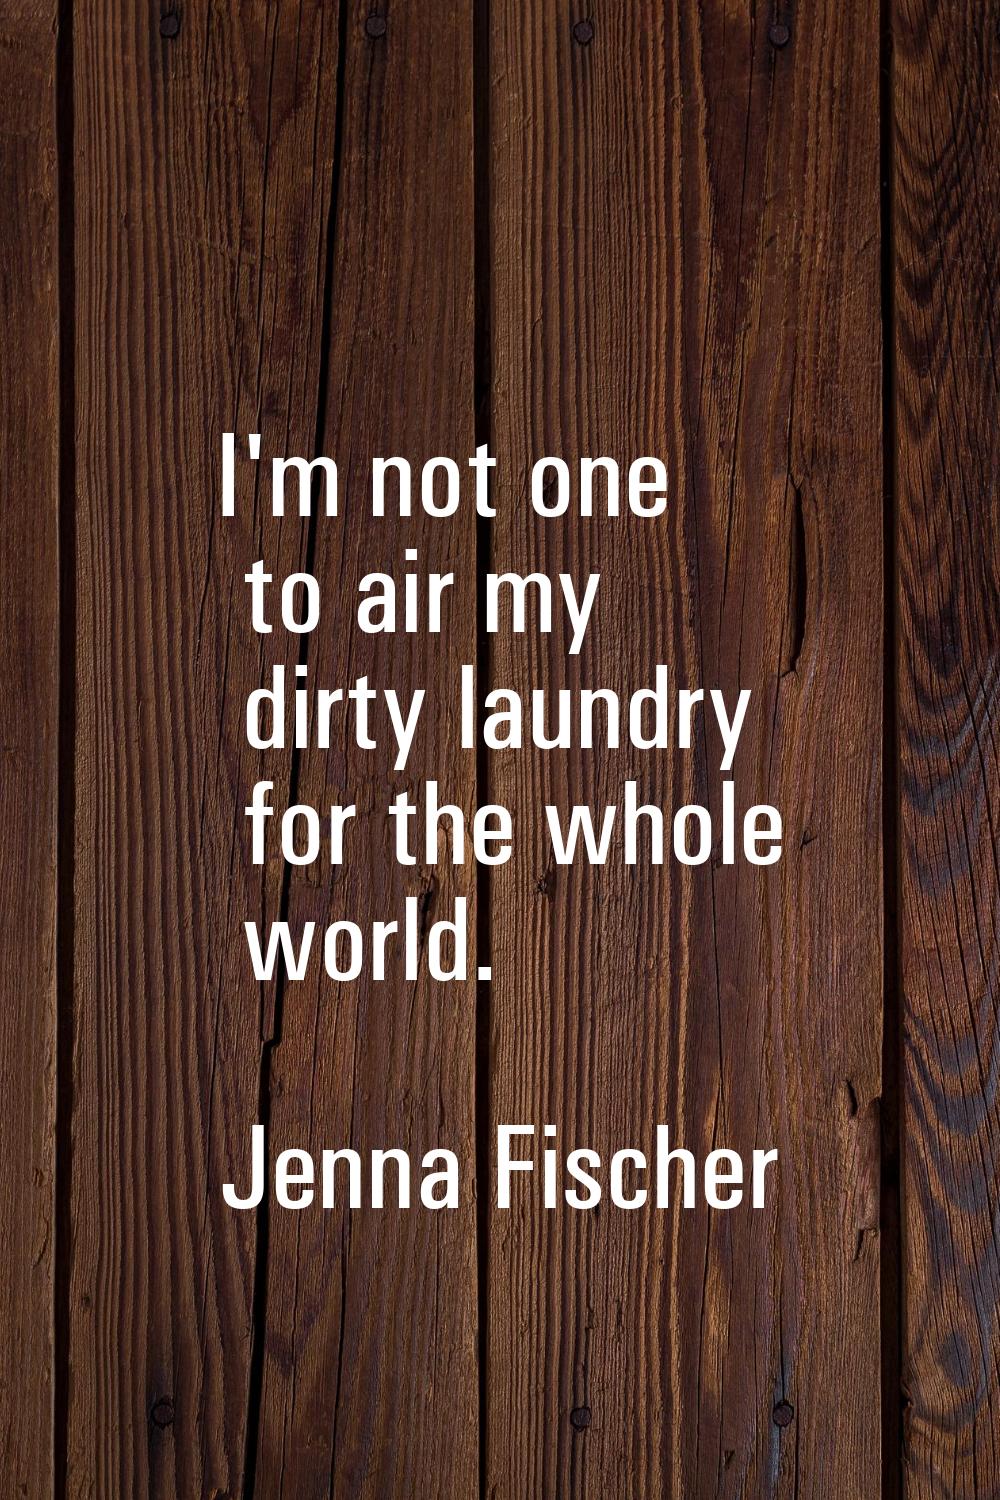 I'm not one to air my dirty laundry for the whole world.